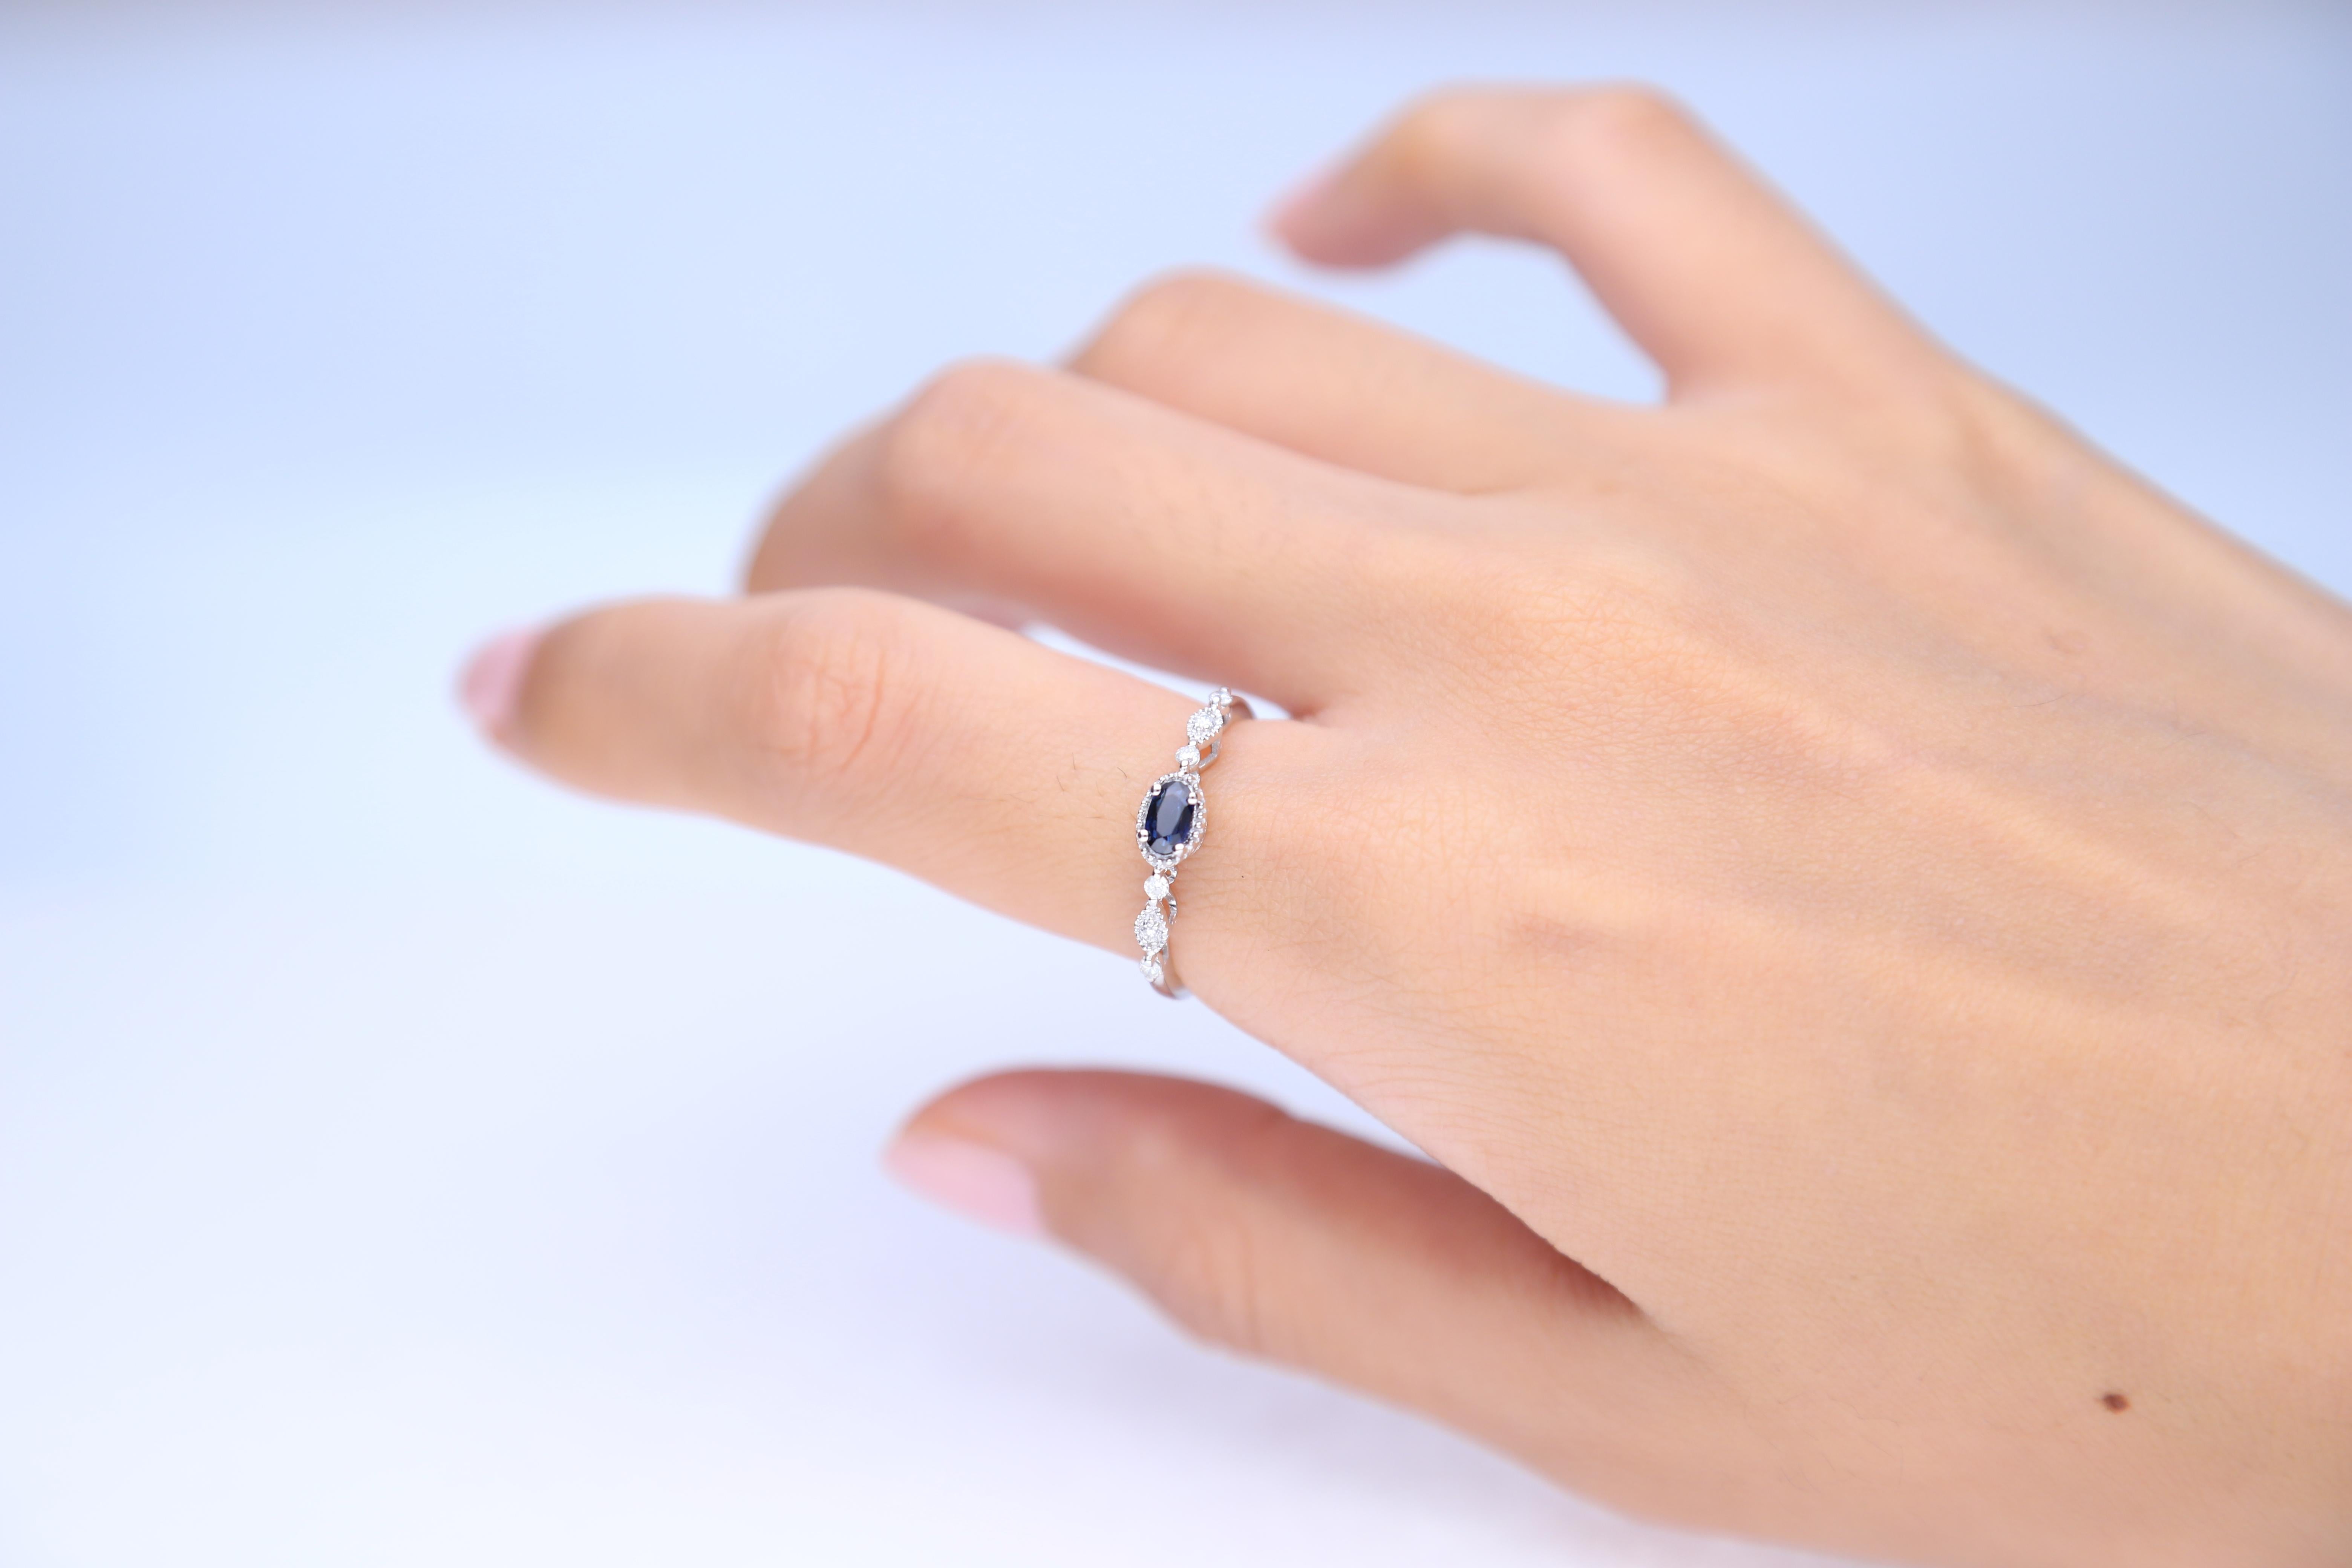 Stunning, timeless and classy eternity Unique Ring. Decorate yourself in luxury with this Gin & Grace Ring. The 10K White Gold jewelry boasts with Oval-cut 1 pcs 0.27 carat Blue Sapphire and Natural Round-cut white Diamond (6 Pcs) 0.09 Carat accent